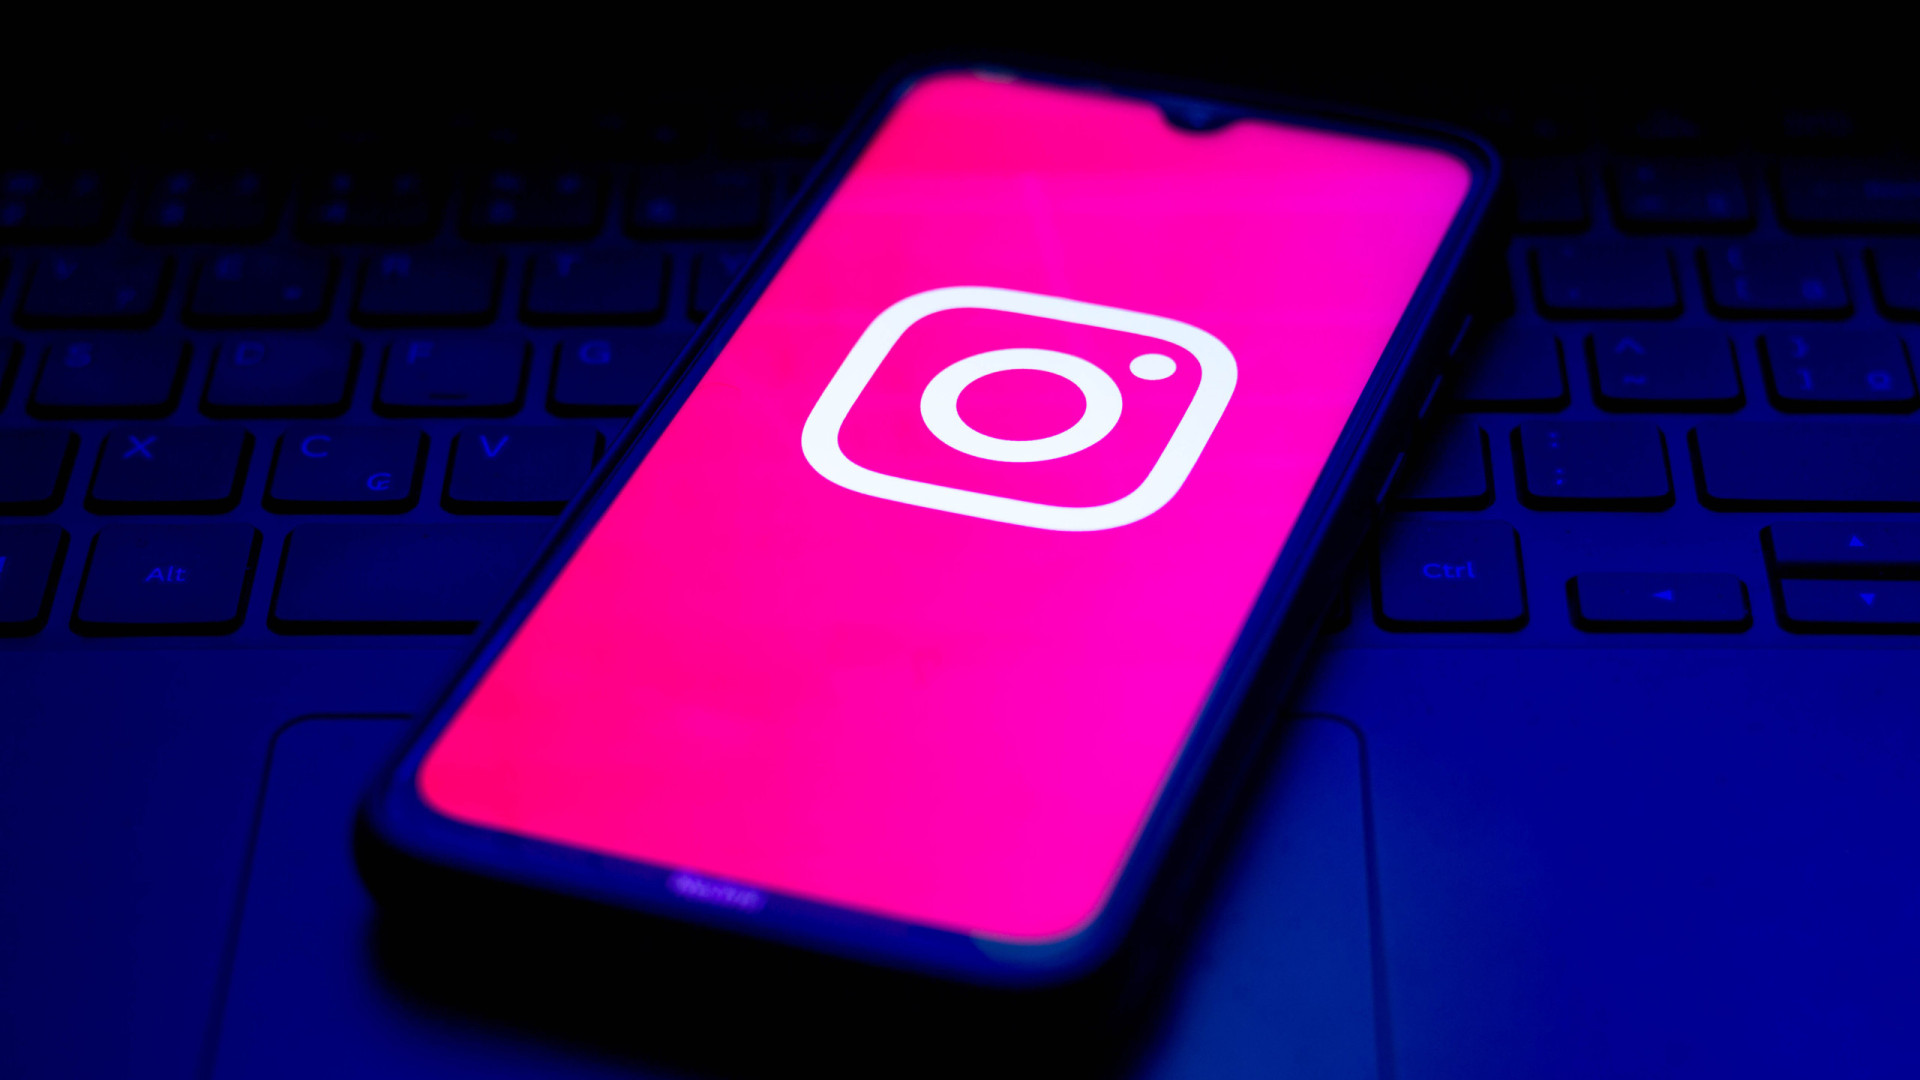 Instagram will not launch Twitter’s competitor in the EU due to privacy concerns